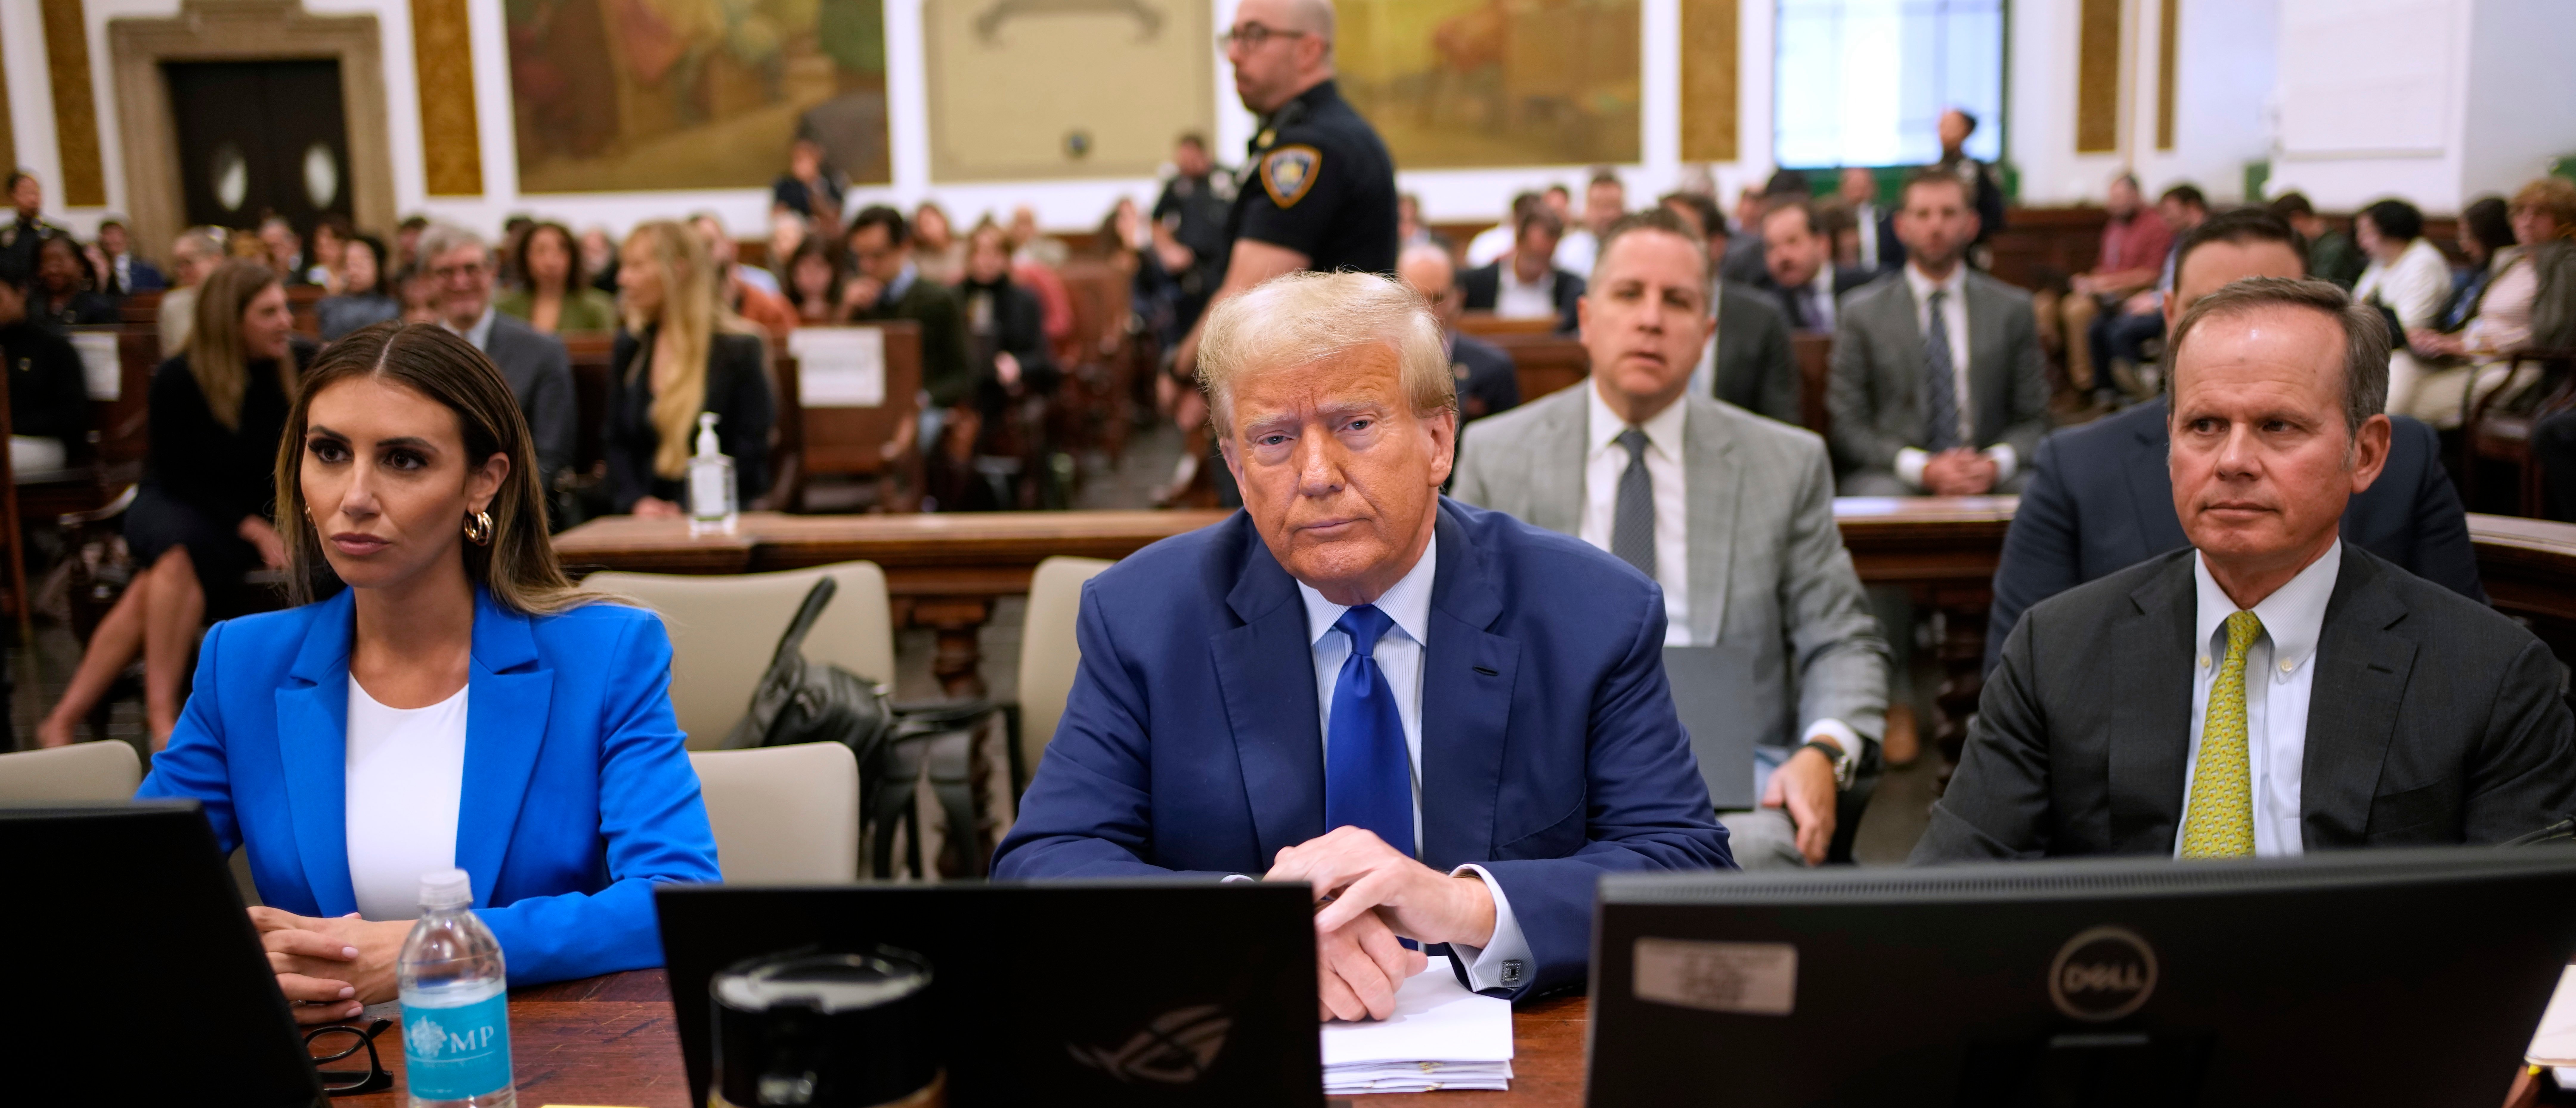 NEW YORK, NEW YORK - OCTOBER 25: Former President Donald Trump sits in court with attorneys Alina Habba and Christopher Kise during his civil fraud trial at New York State Supreme Court on October 25, 2023 in New York City. The former president may be forced to sell off his properties after Justice Arthur Engoron canceled his business certificates and ruled that he committed fraud for years while building his real estate empire after being sued by Attorney General Letitia James, seeking $250 million in damages. The trial will determine how much he and his companies will be penalized for the fraud. (Photo by Seth Wenig-Pool/Getty Images)